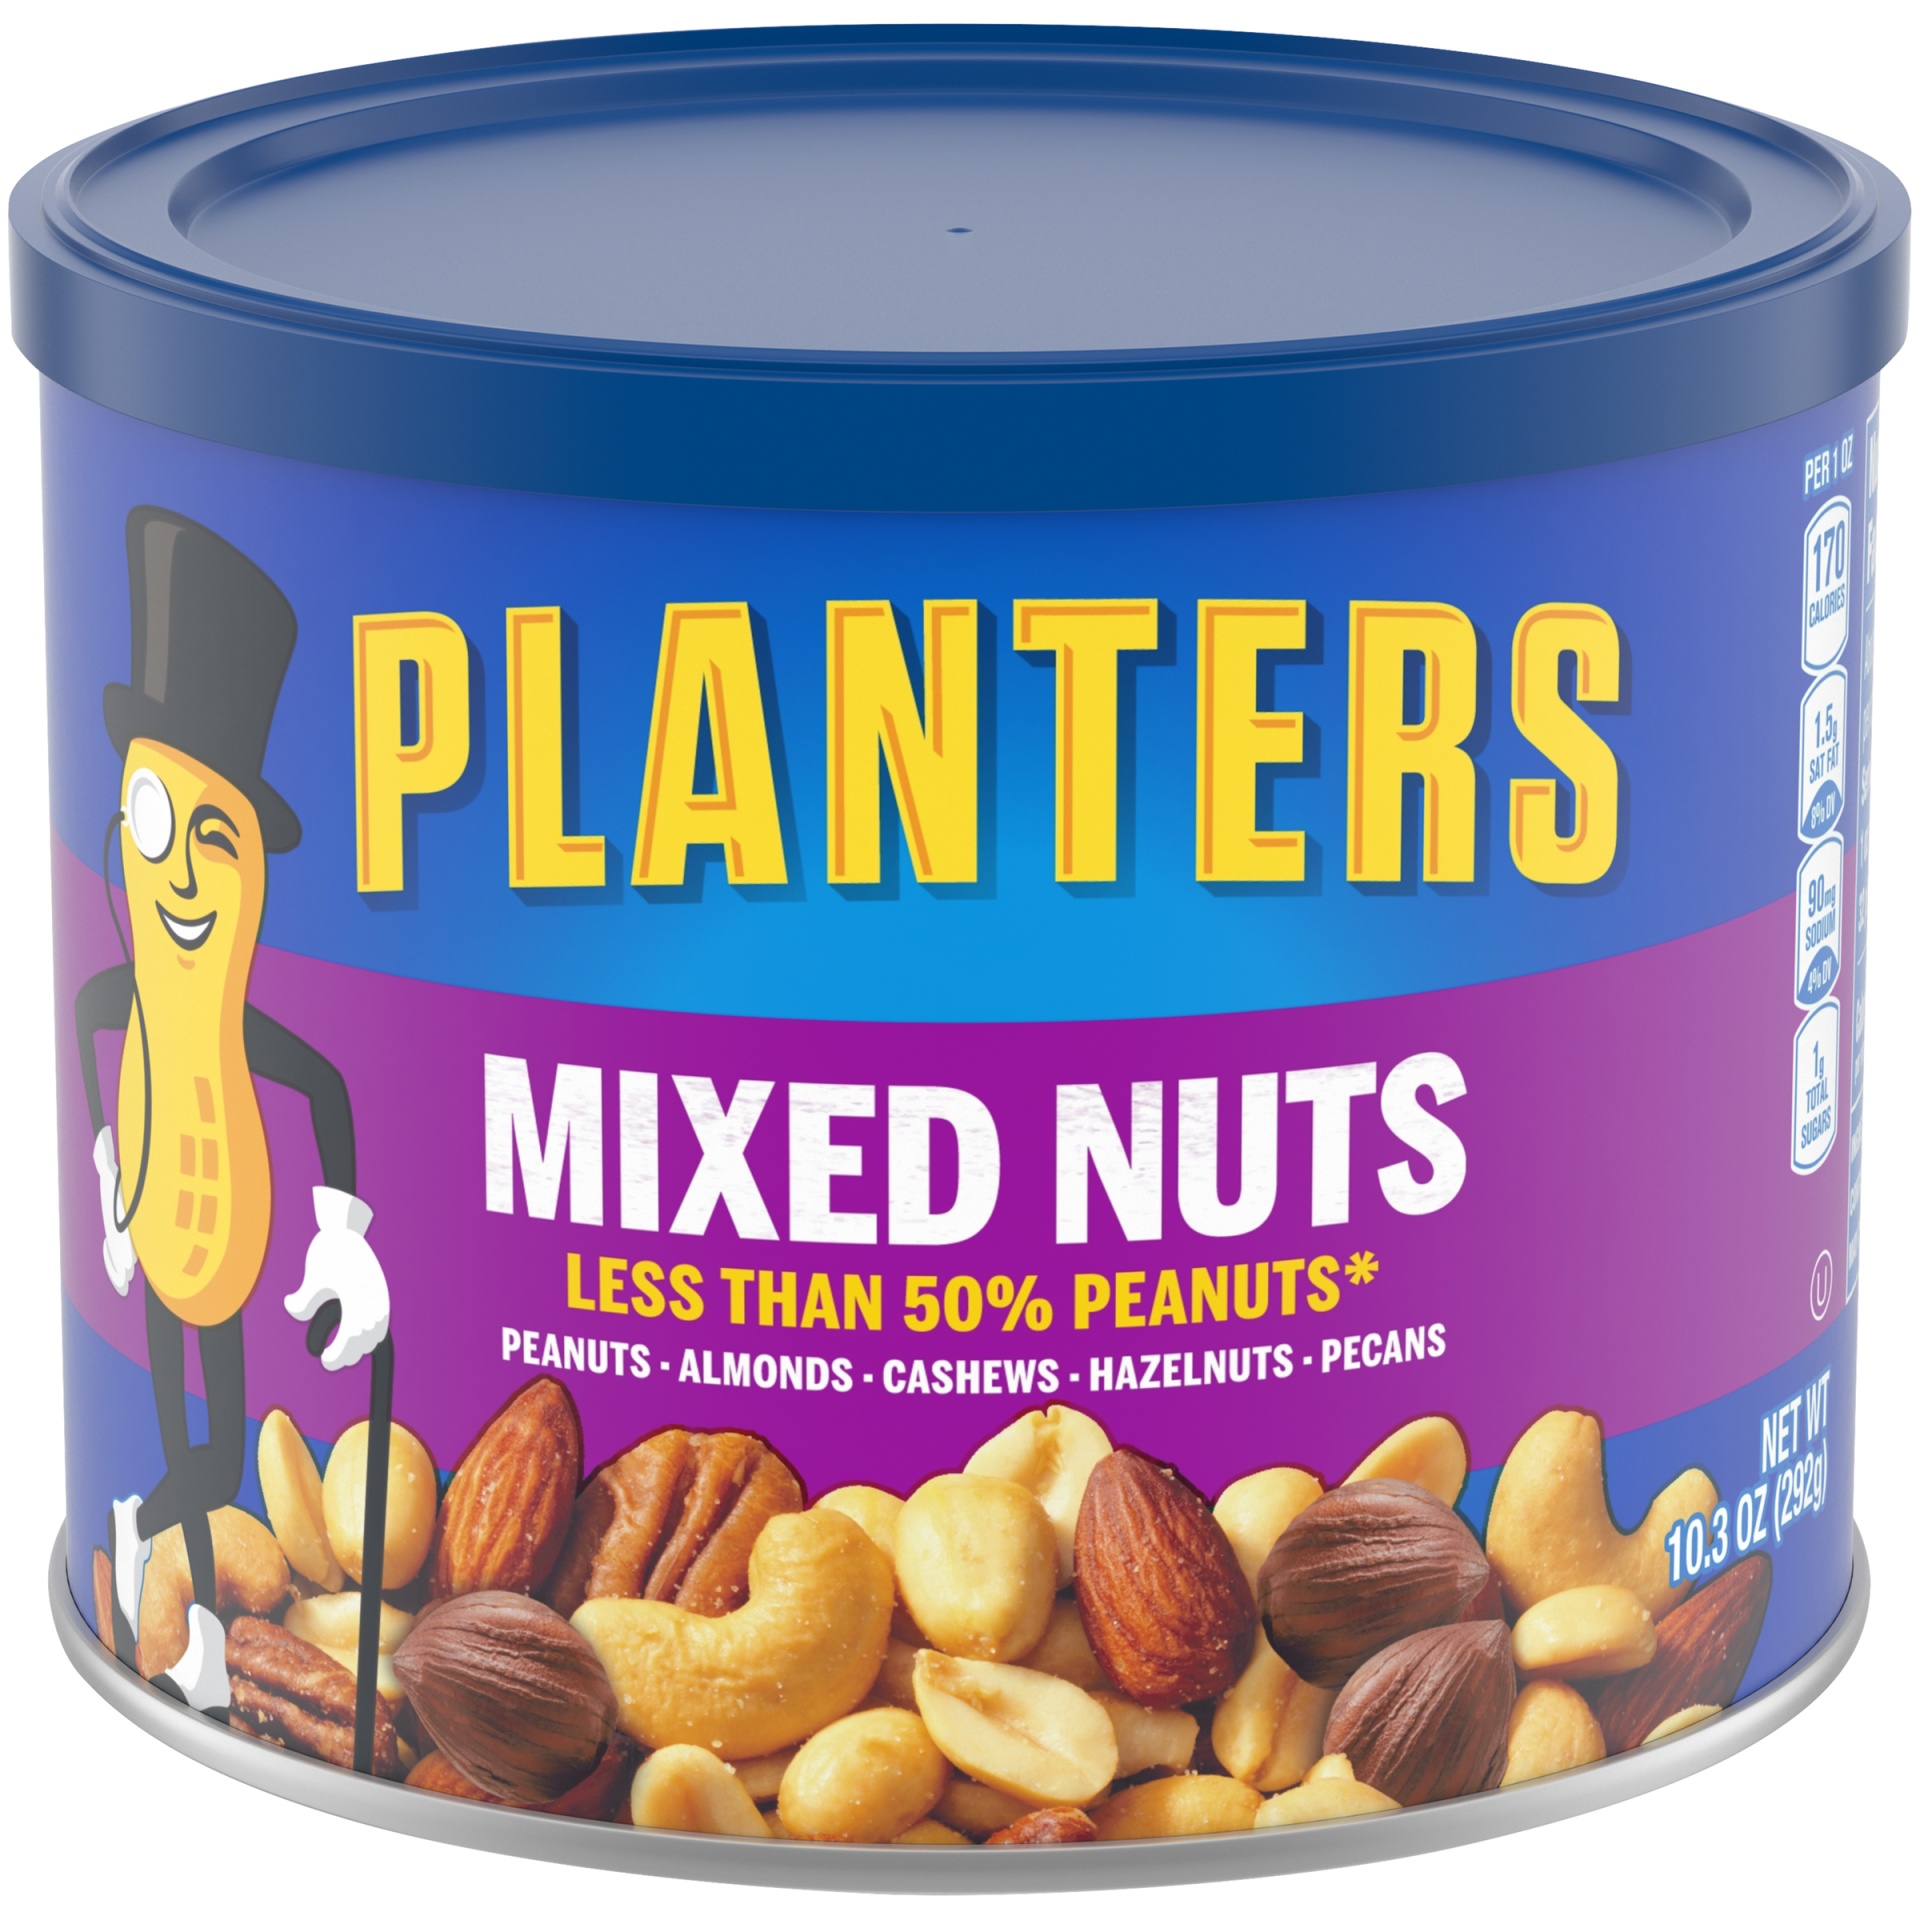 slide 1 of 15, Planters Mixed Nuts Less Than 50% Peanuts with Peanuts, Almonds, Cashews, Hazelnuts & Pecans, 10.3 oz